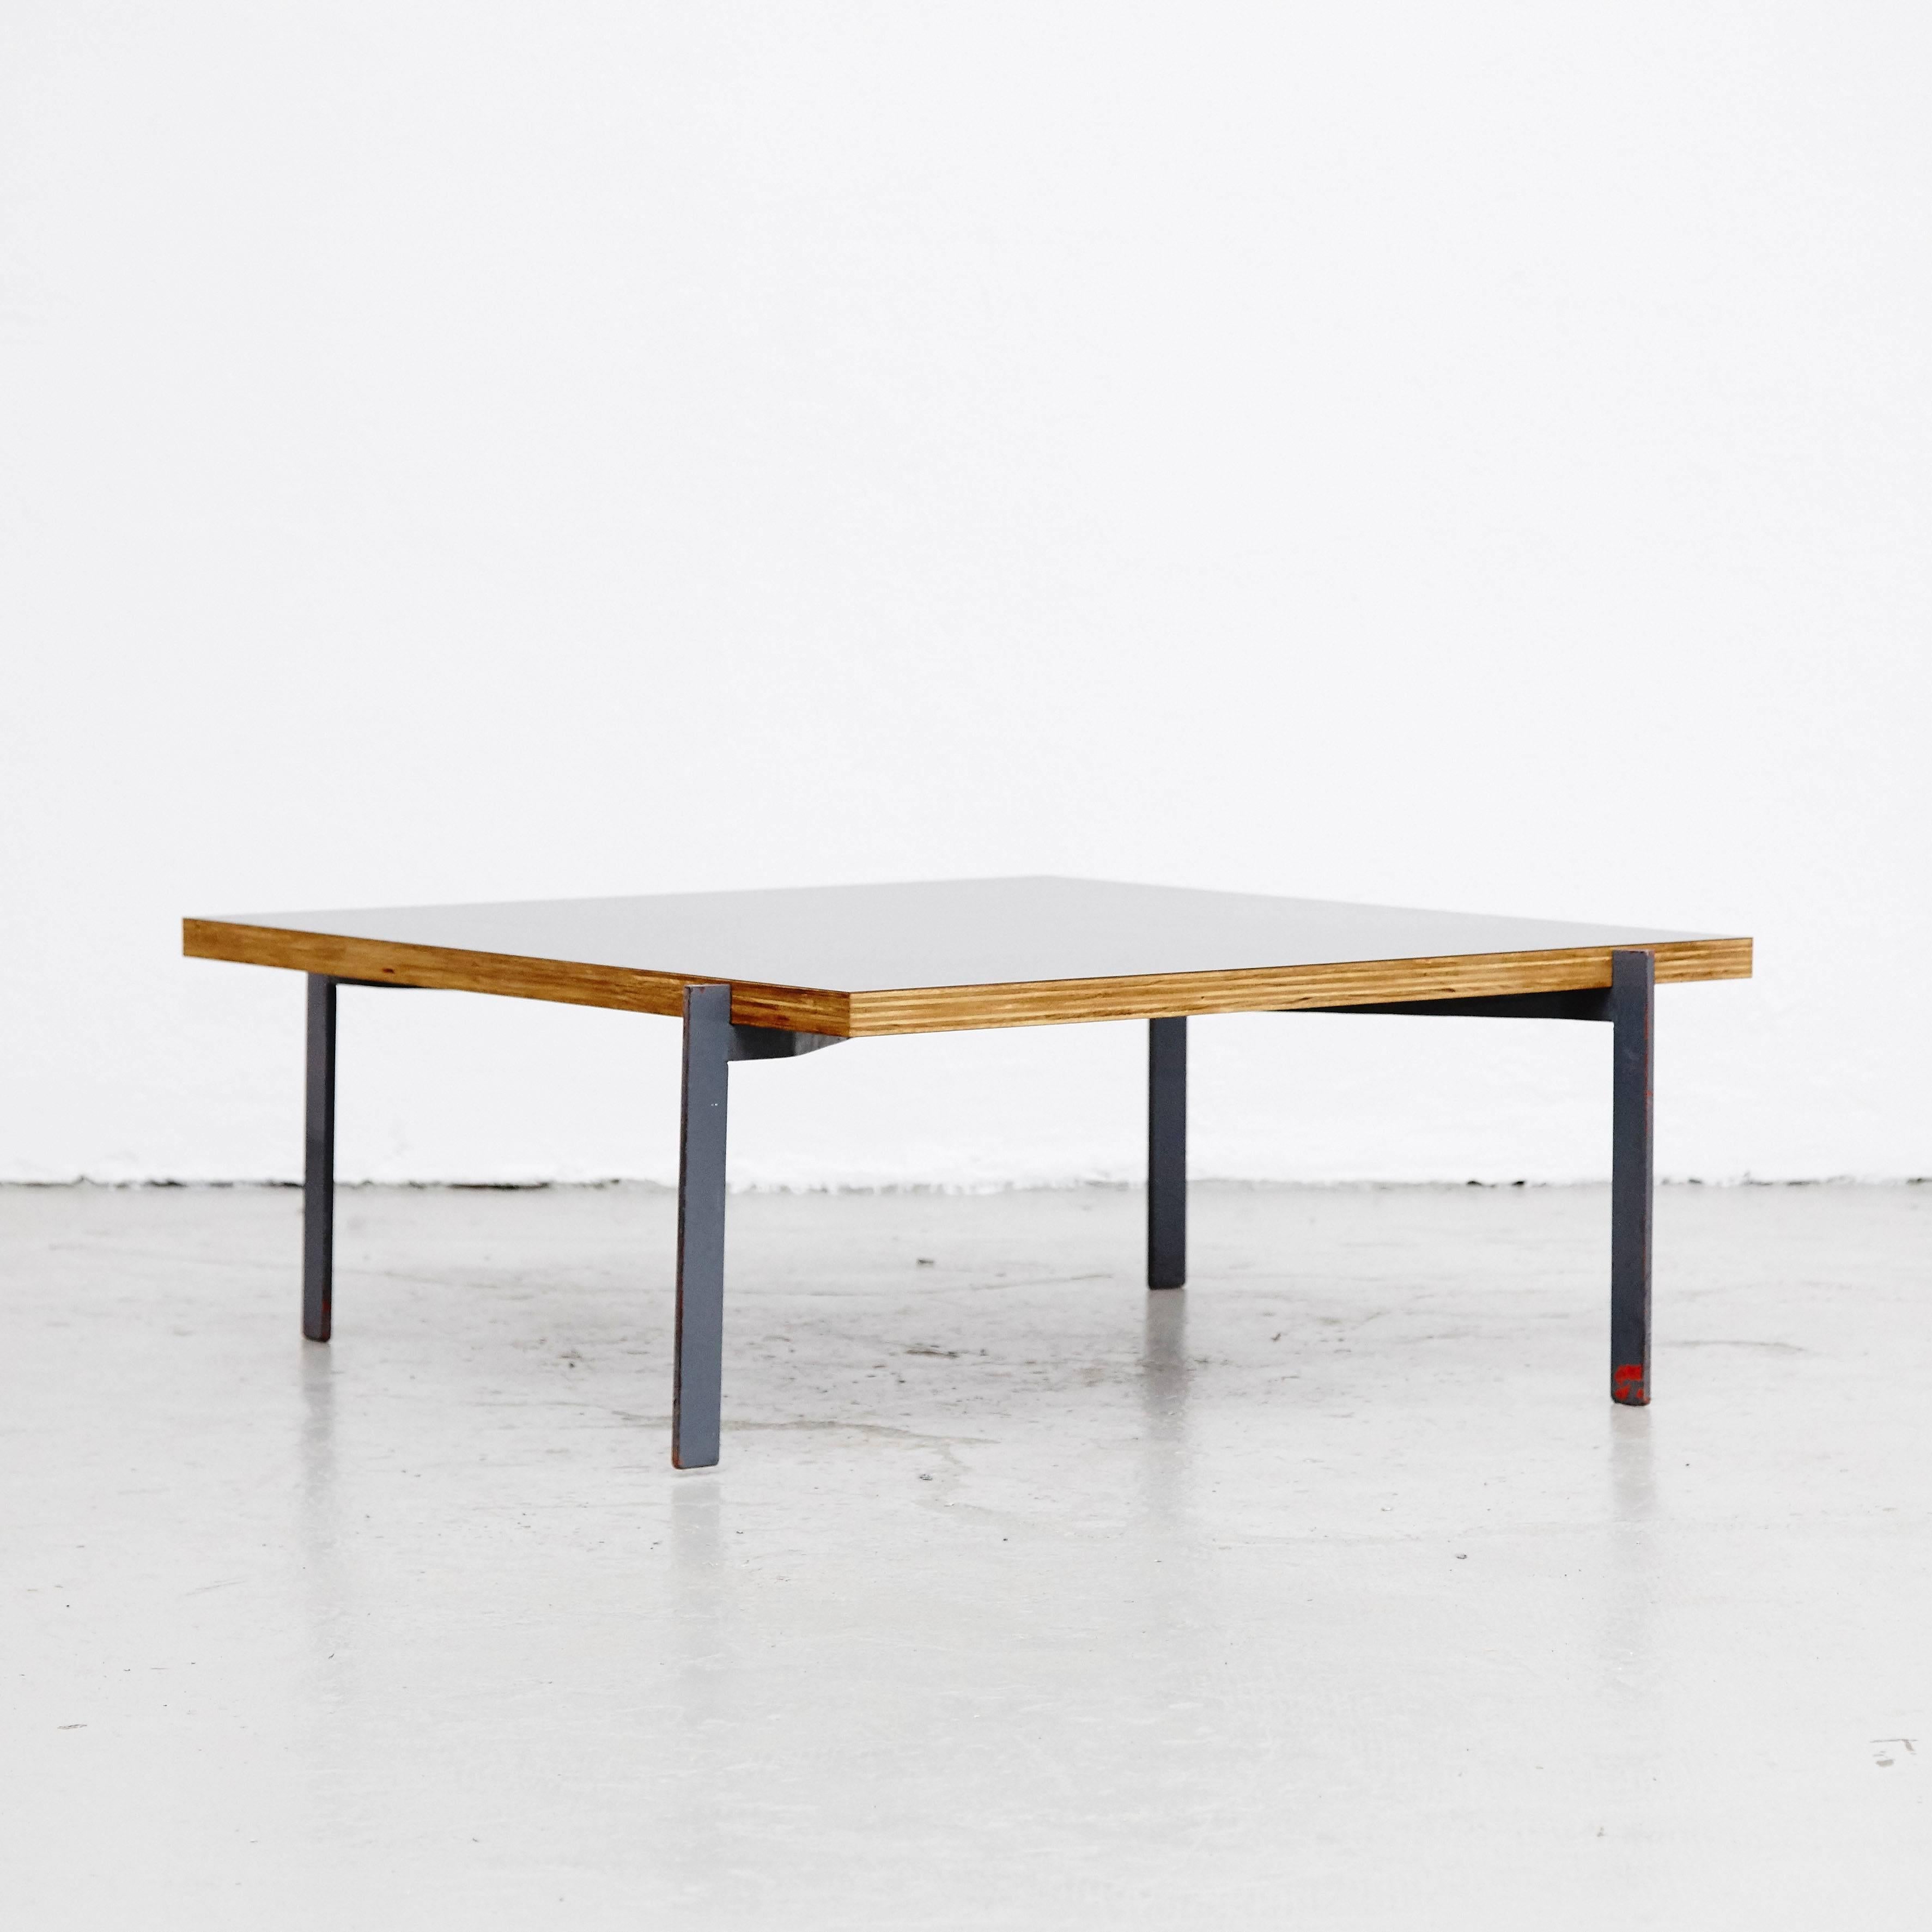 Coffee table in the style of Poul Kjærholm designed in manufactured in Denmark.

Steel and lamieted wood top.

In good original condition, with minor wear consistent with age and use, preserving a beautiful patina.

Poul Kjærholm (January 8,